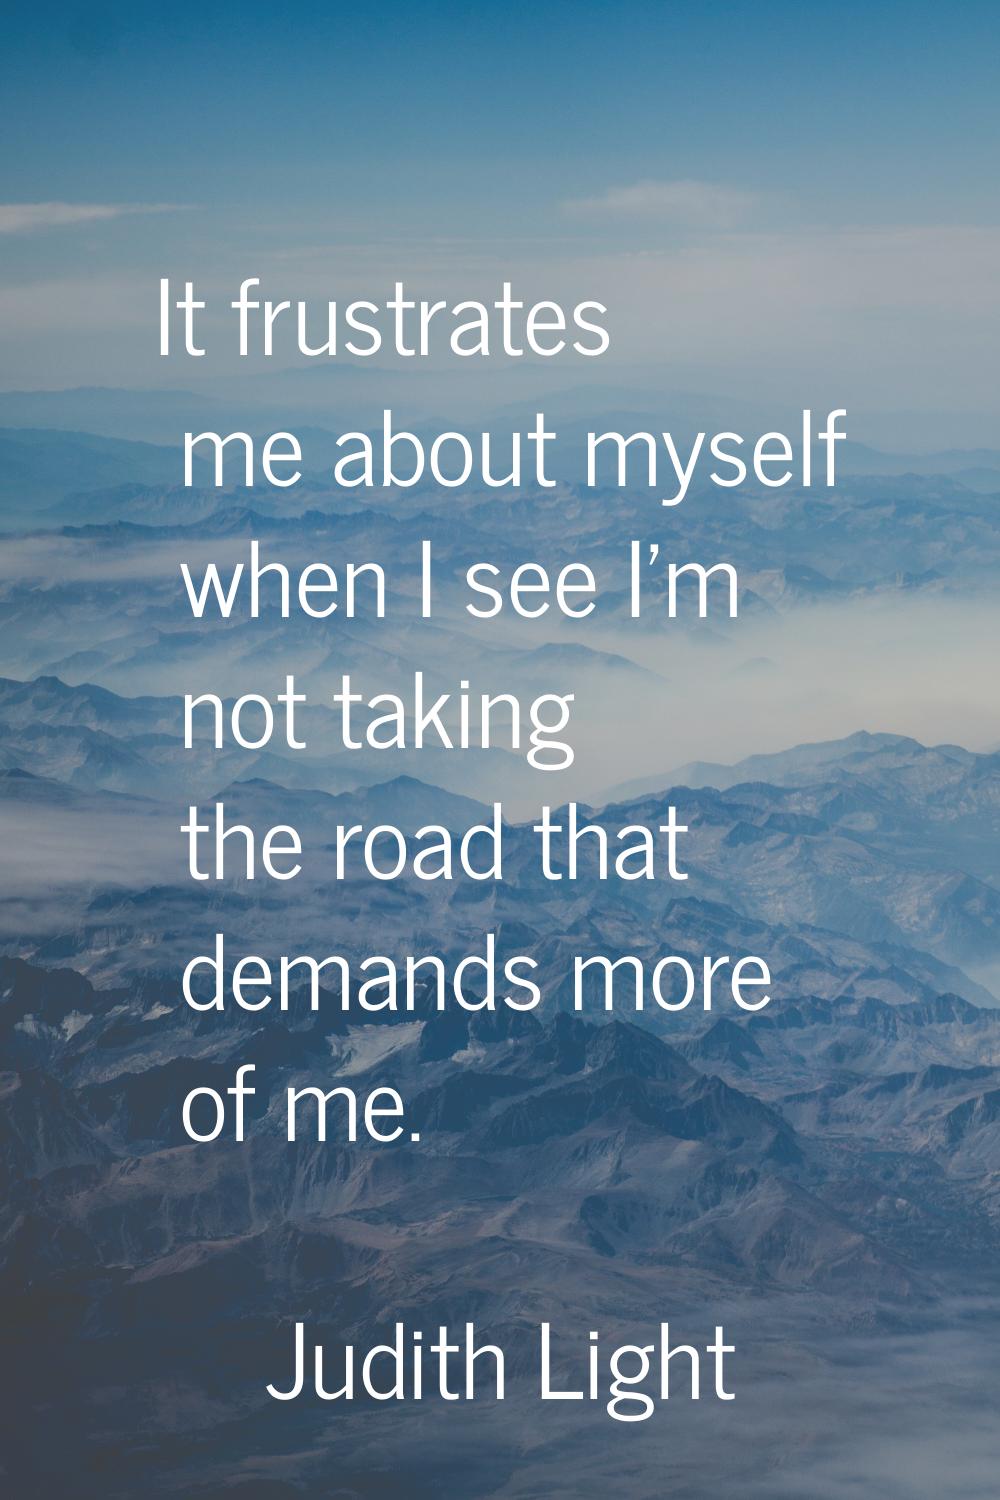 It frustrates me about myself when I see I'm not taking the road that demands more of me.